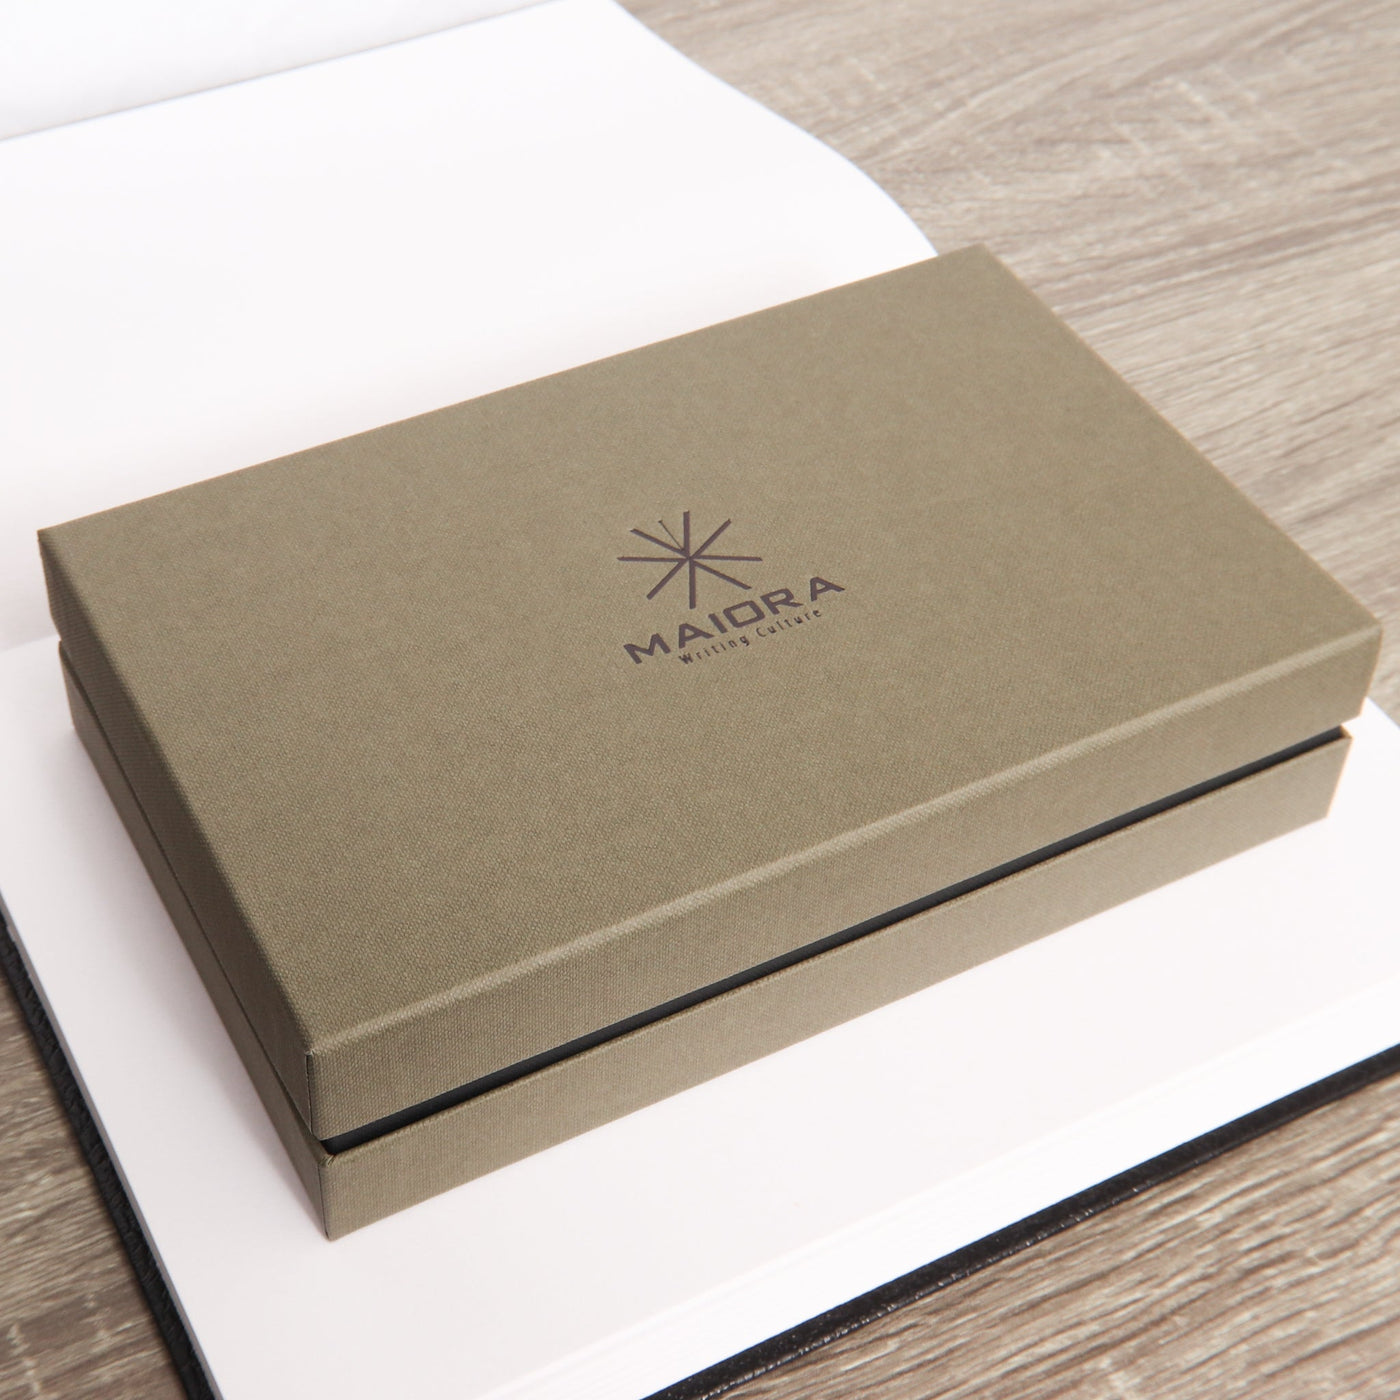 Maiora Notte Luna Numbered Edition Fountain Pen Box